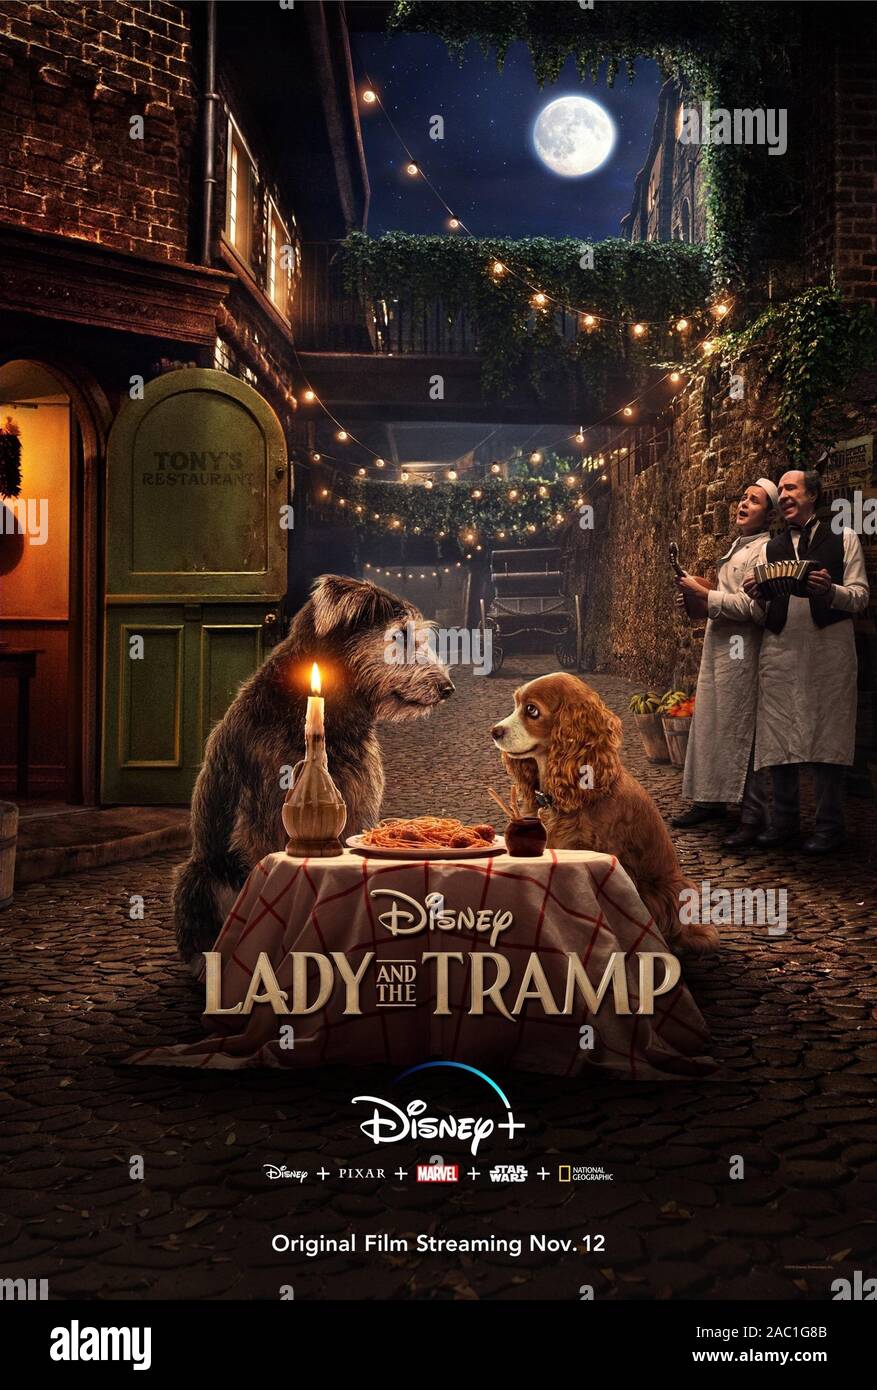 LADY AND THE TRAMP (2019), directed by CHARLIE BEAN. Credit: WALT DISNEY PICTURES / Album Stock Photo